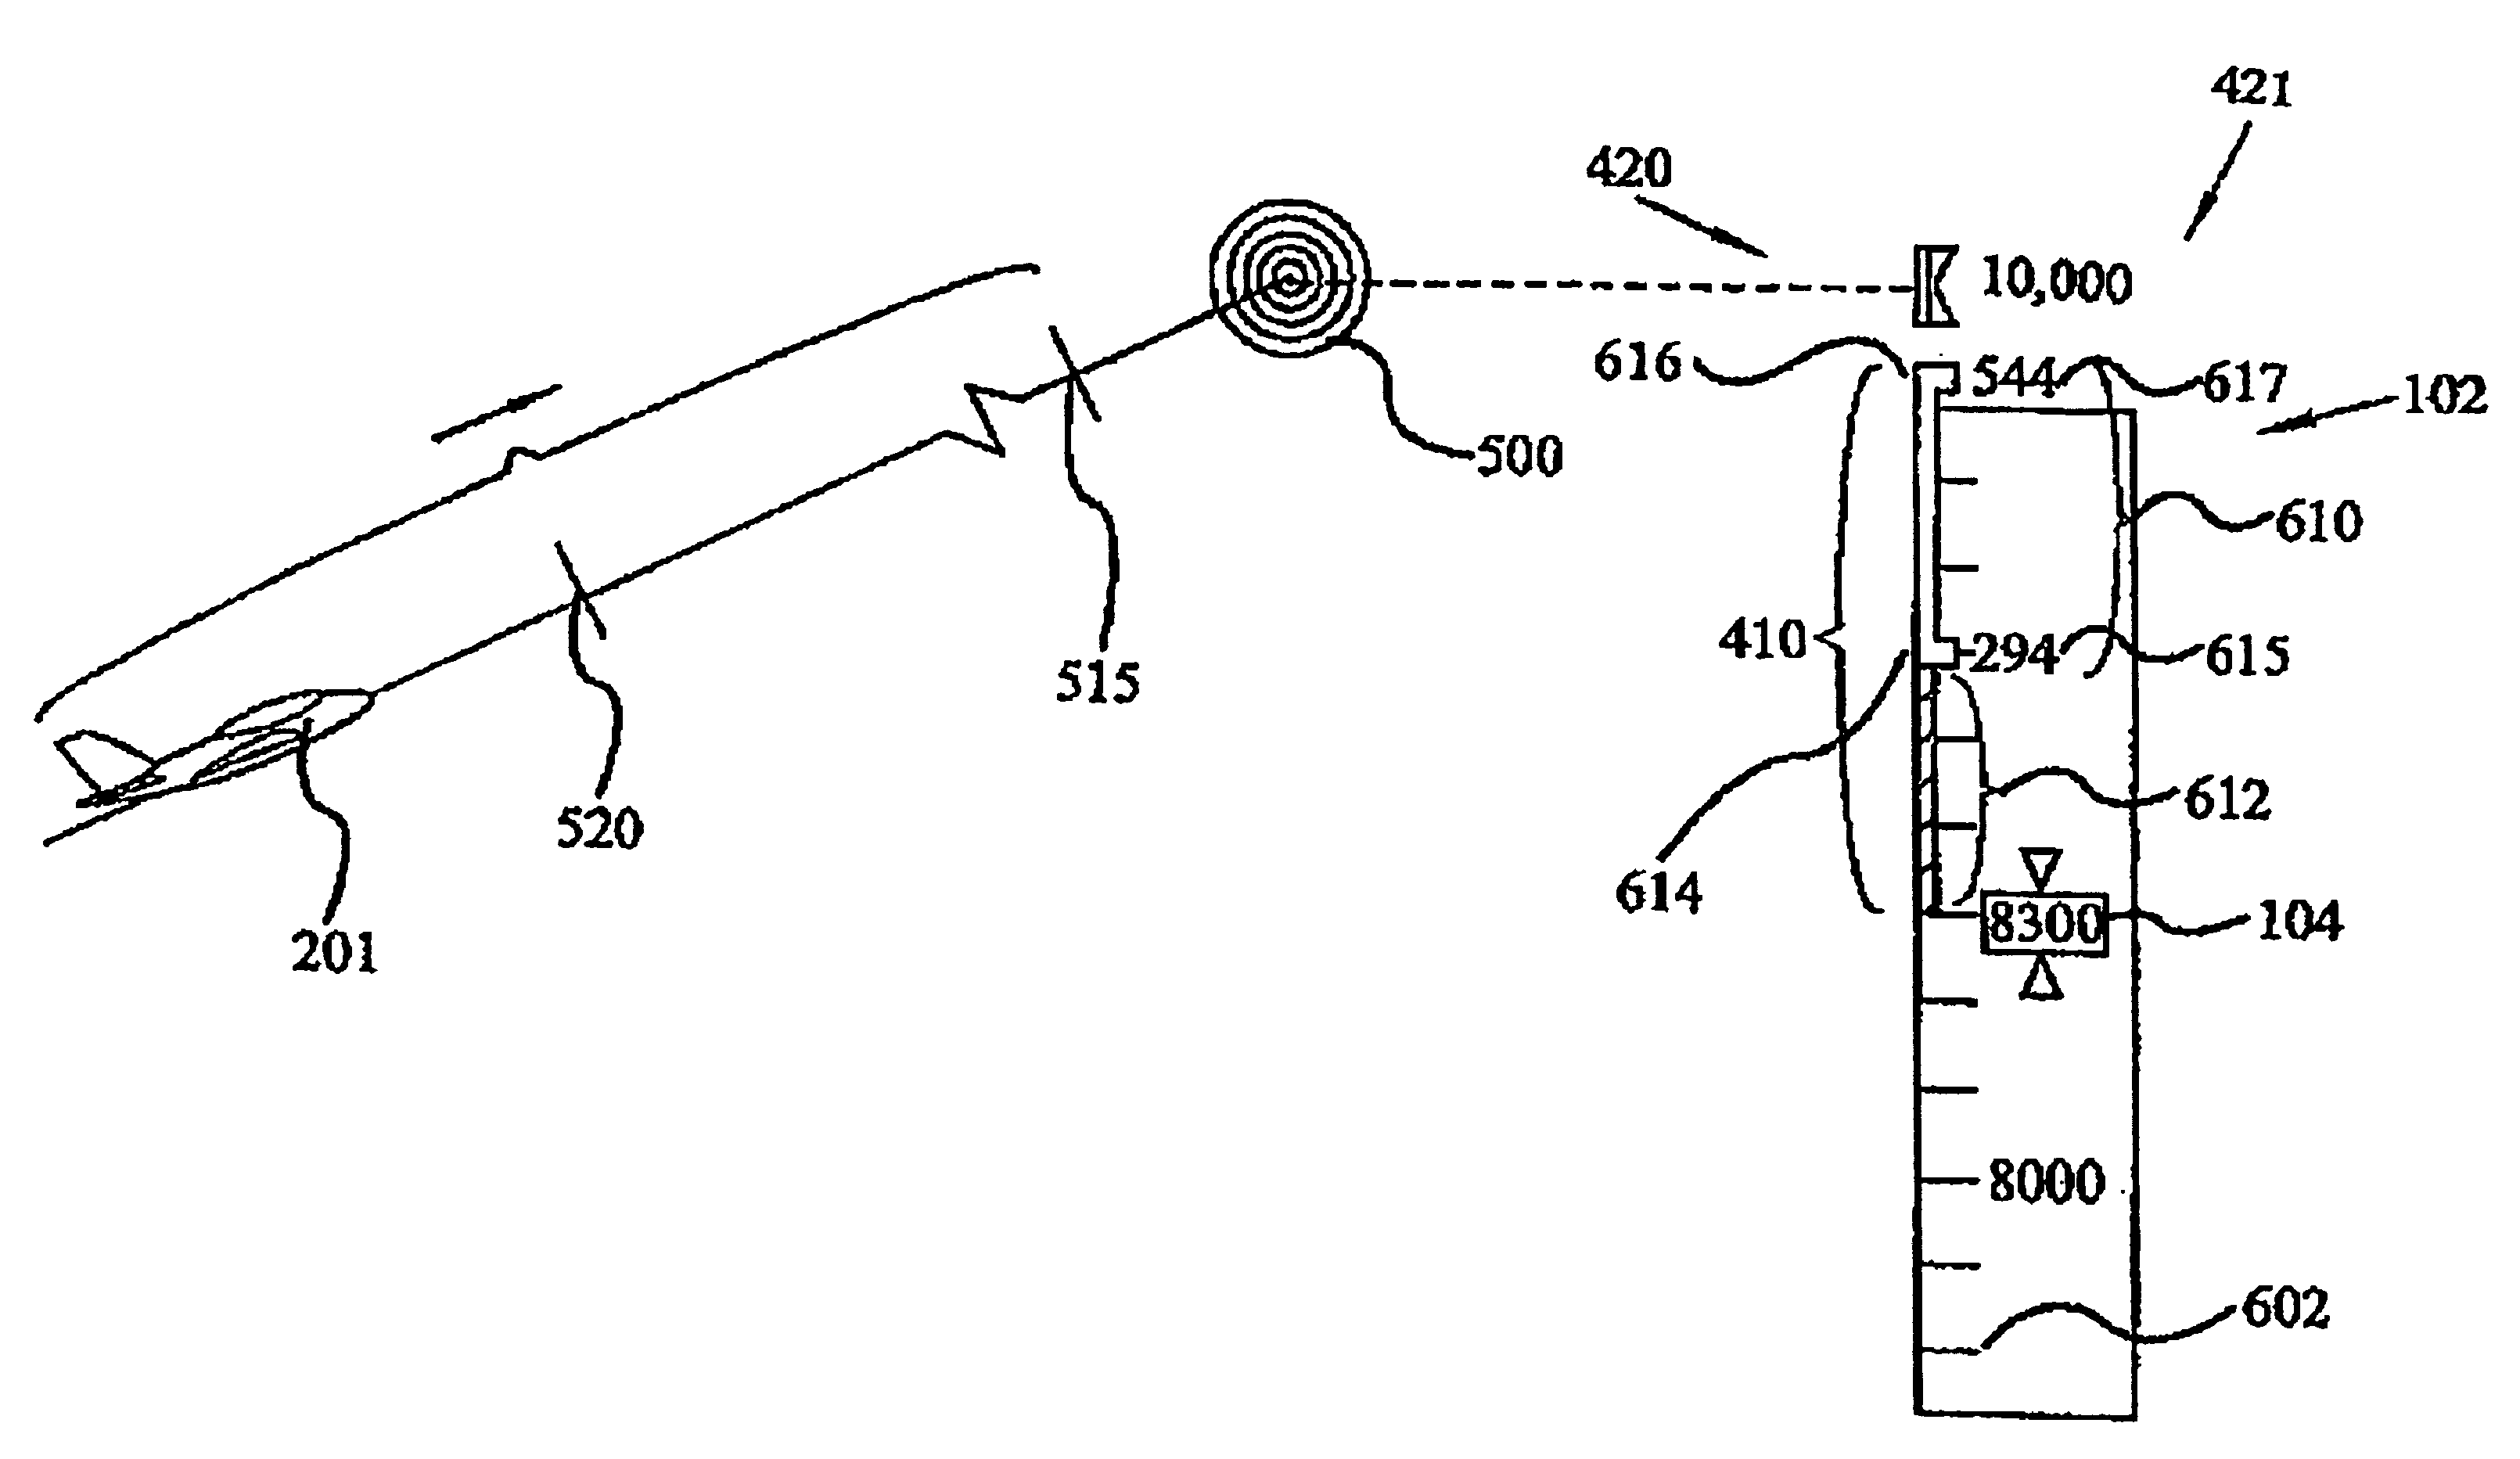 Display of altitude and path capture trajectories